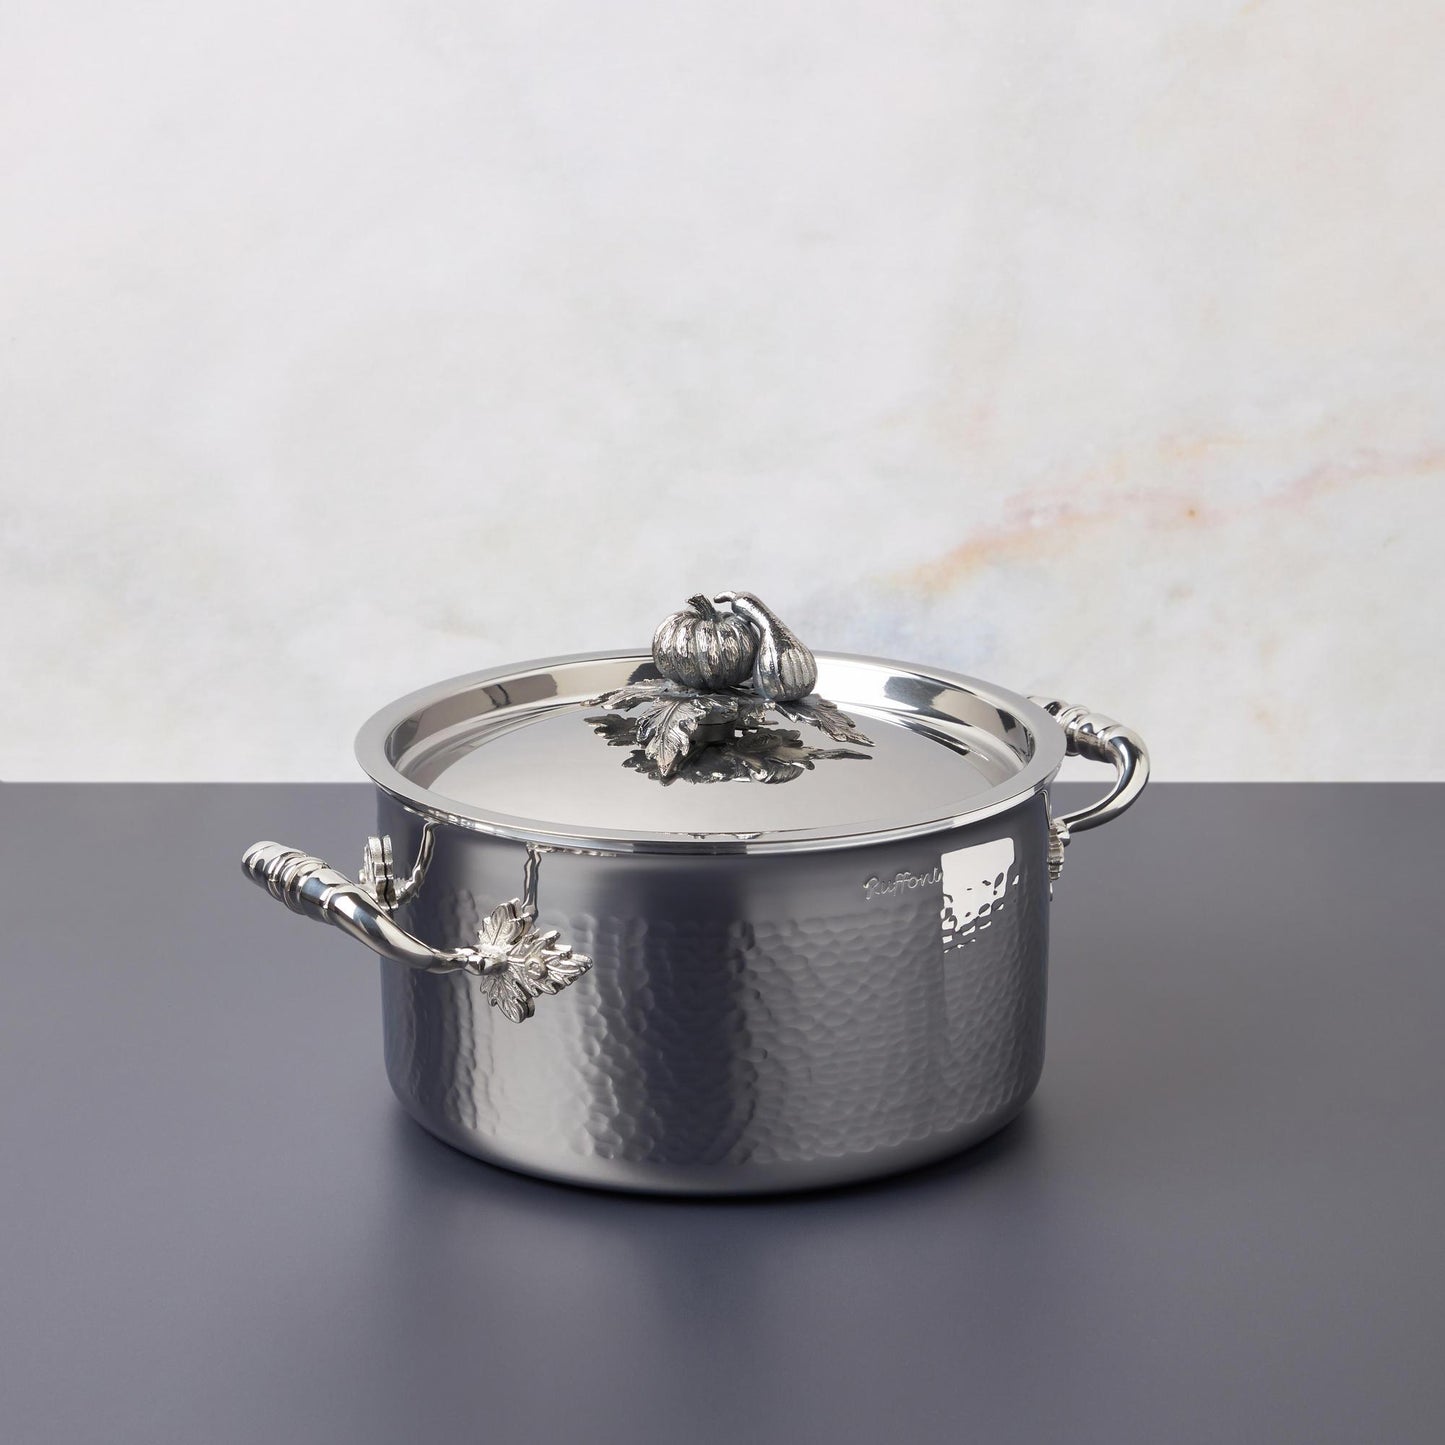  Opus Prima hammered clad stainless steel soup pot with decorated silver-plated lid knob finial from Ruffoni